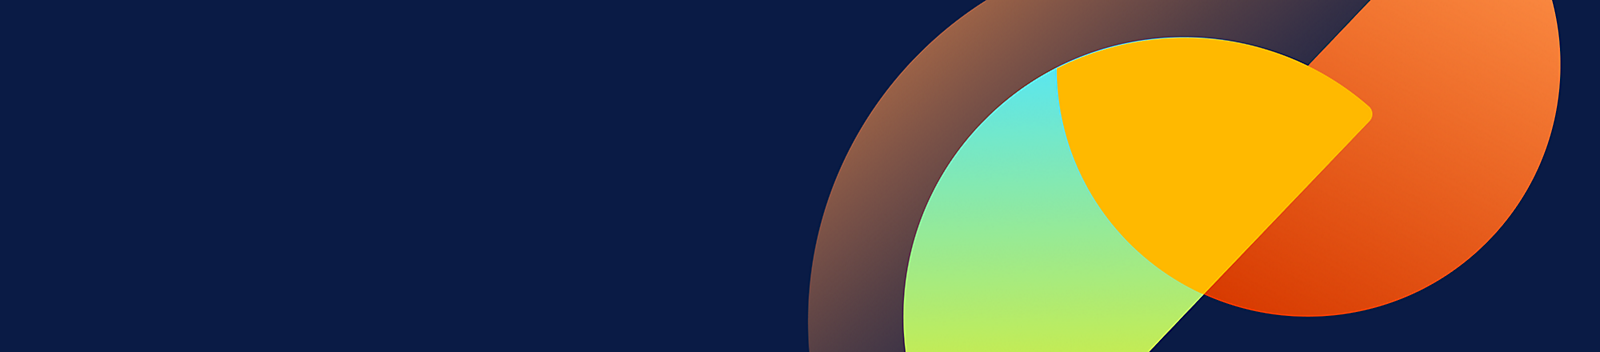 A semi circle if orange color and yellow green semi circle on blue background.